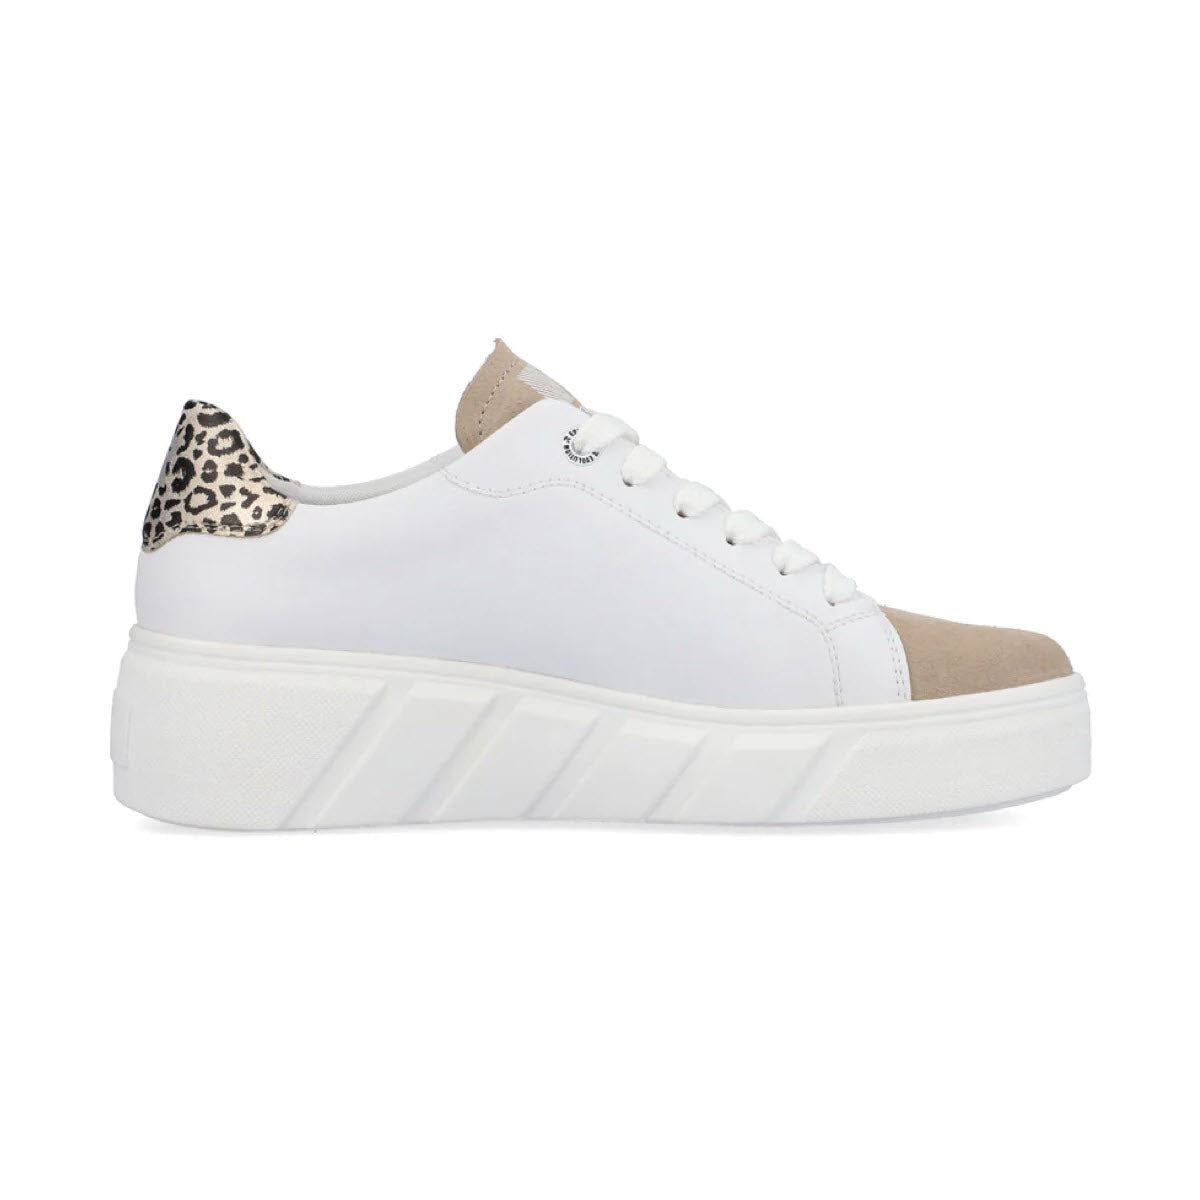 Revolution platform street sneaker in white with a beige toe cap and leopard print detail on the heel, featuring a leather upper.